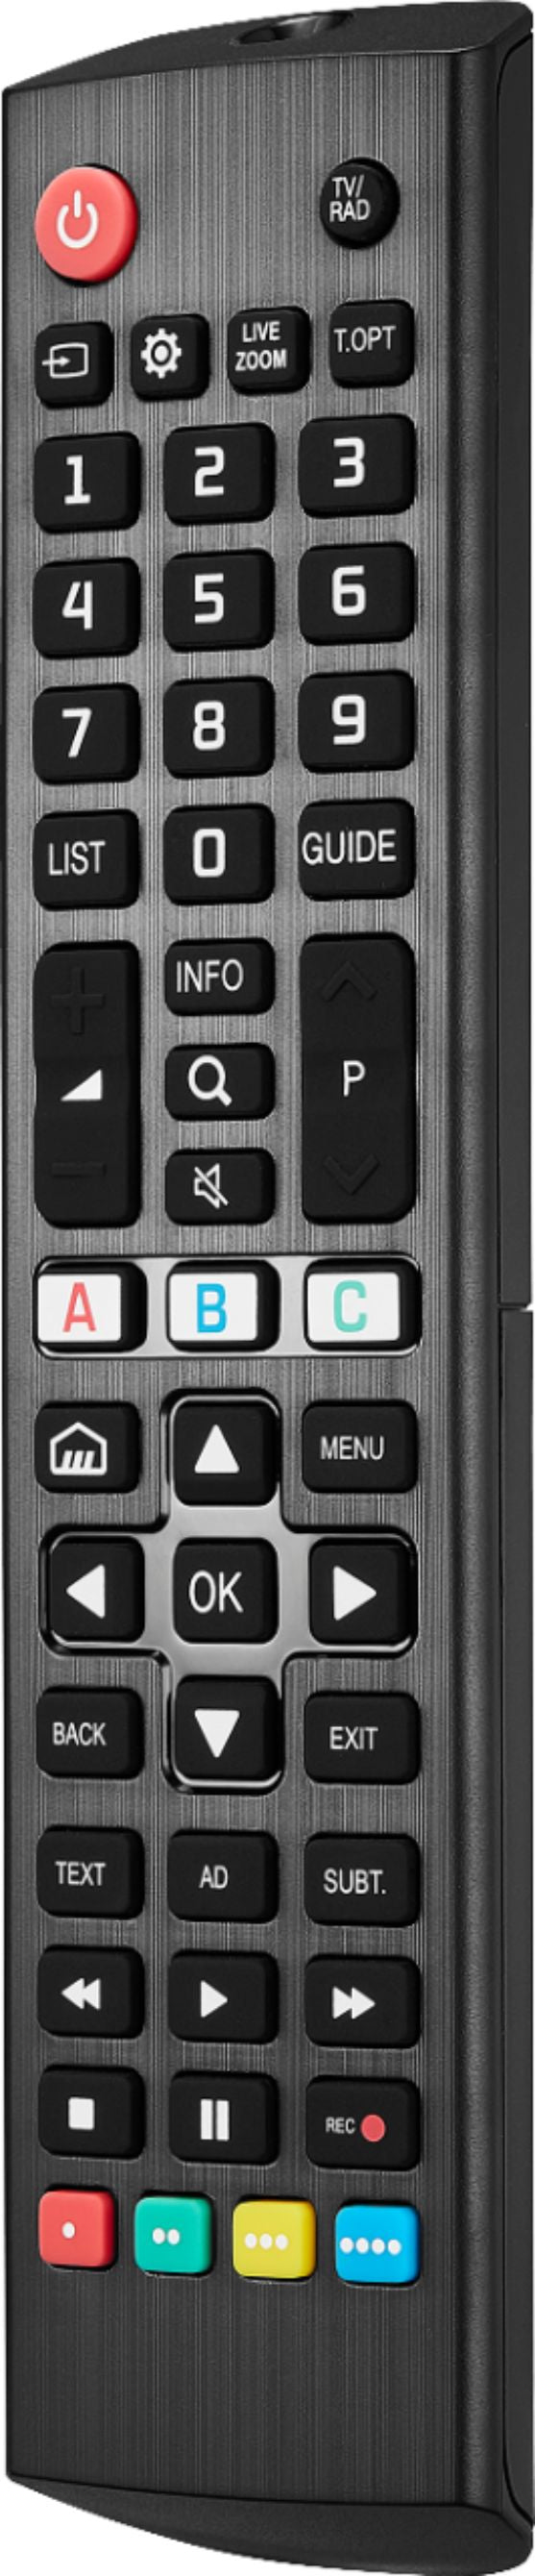 Insignia™ - Replacement Remote for LG TVs - Black